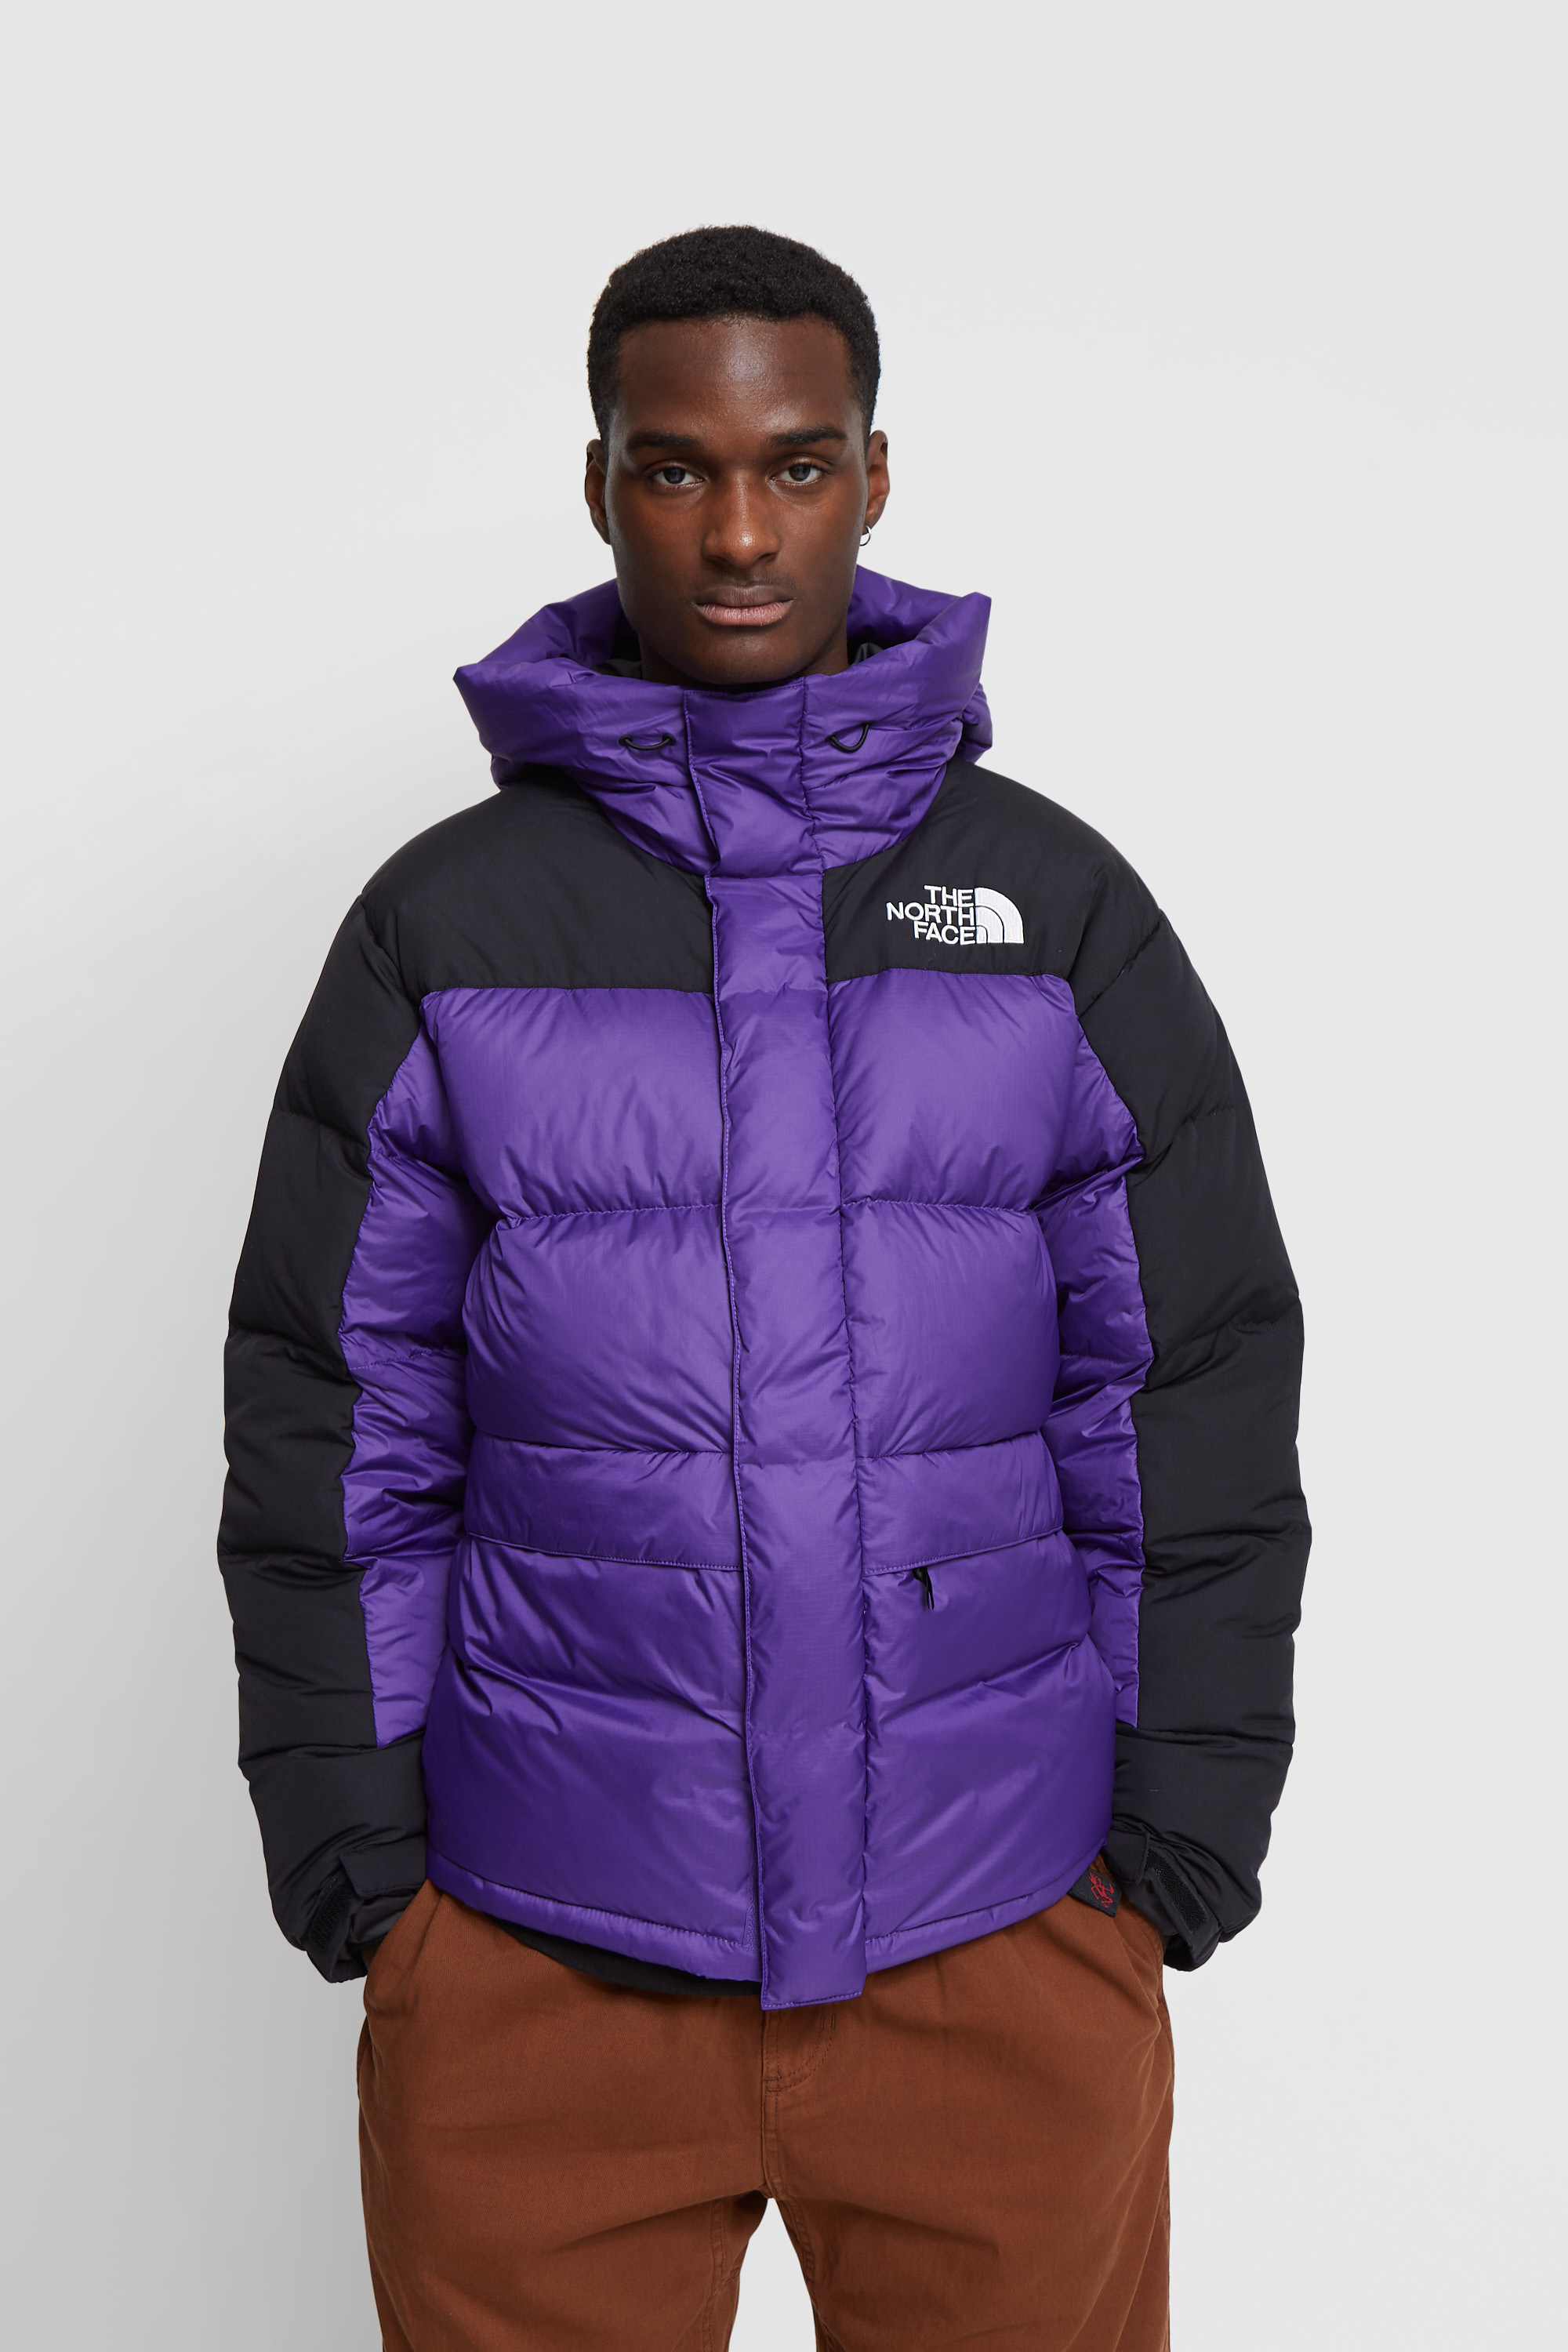 north face 650 down jacket